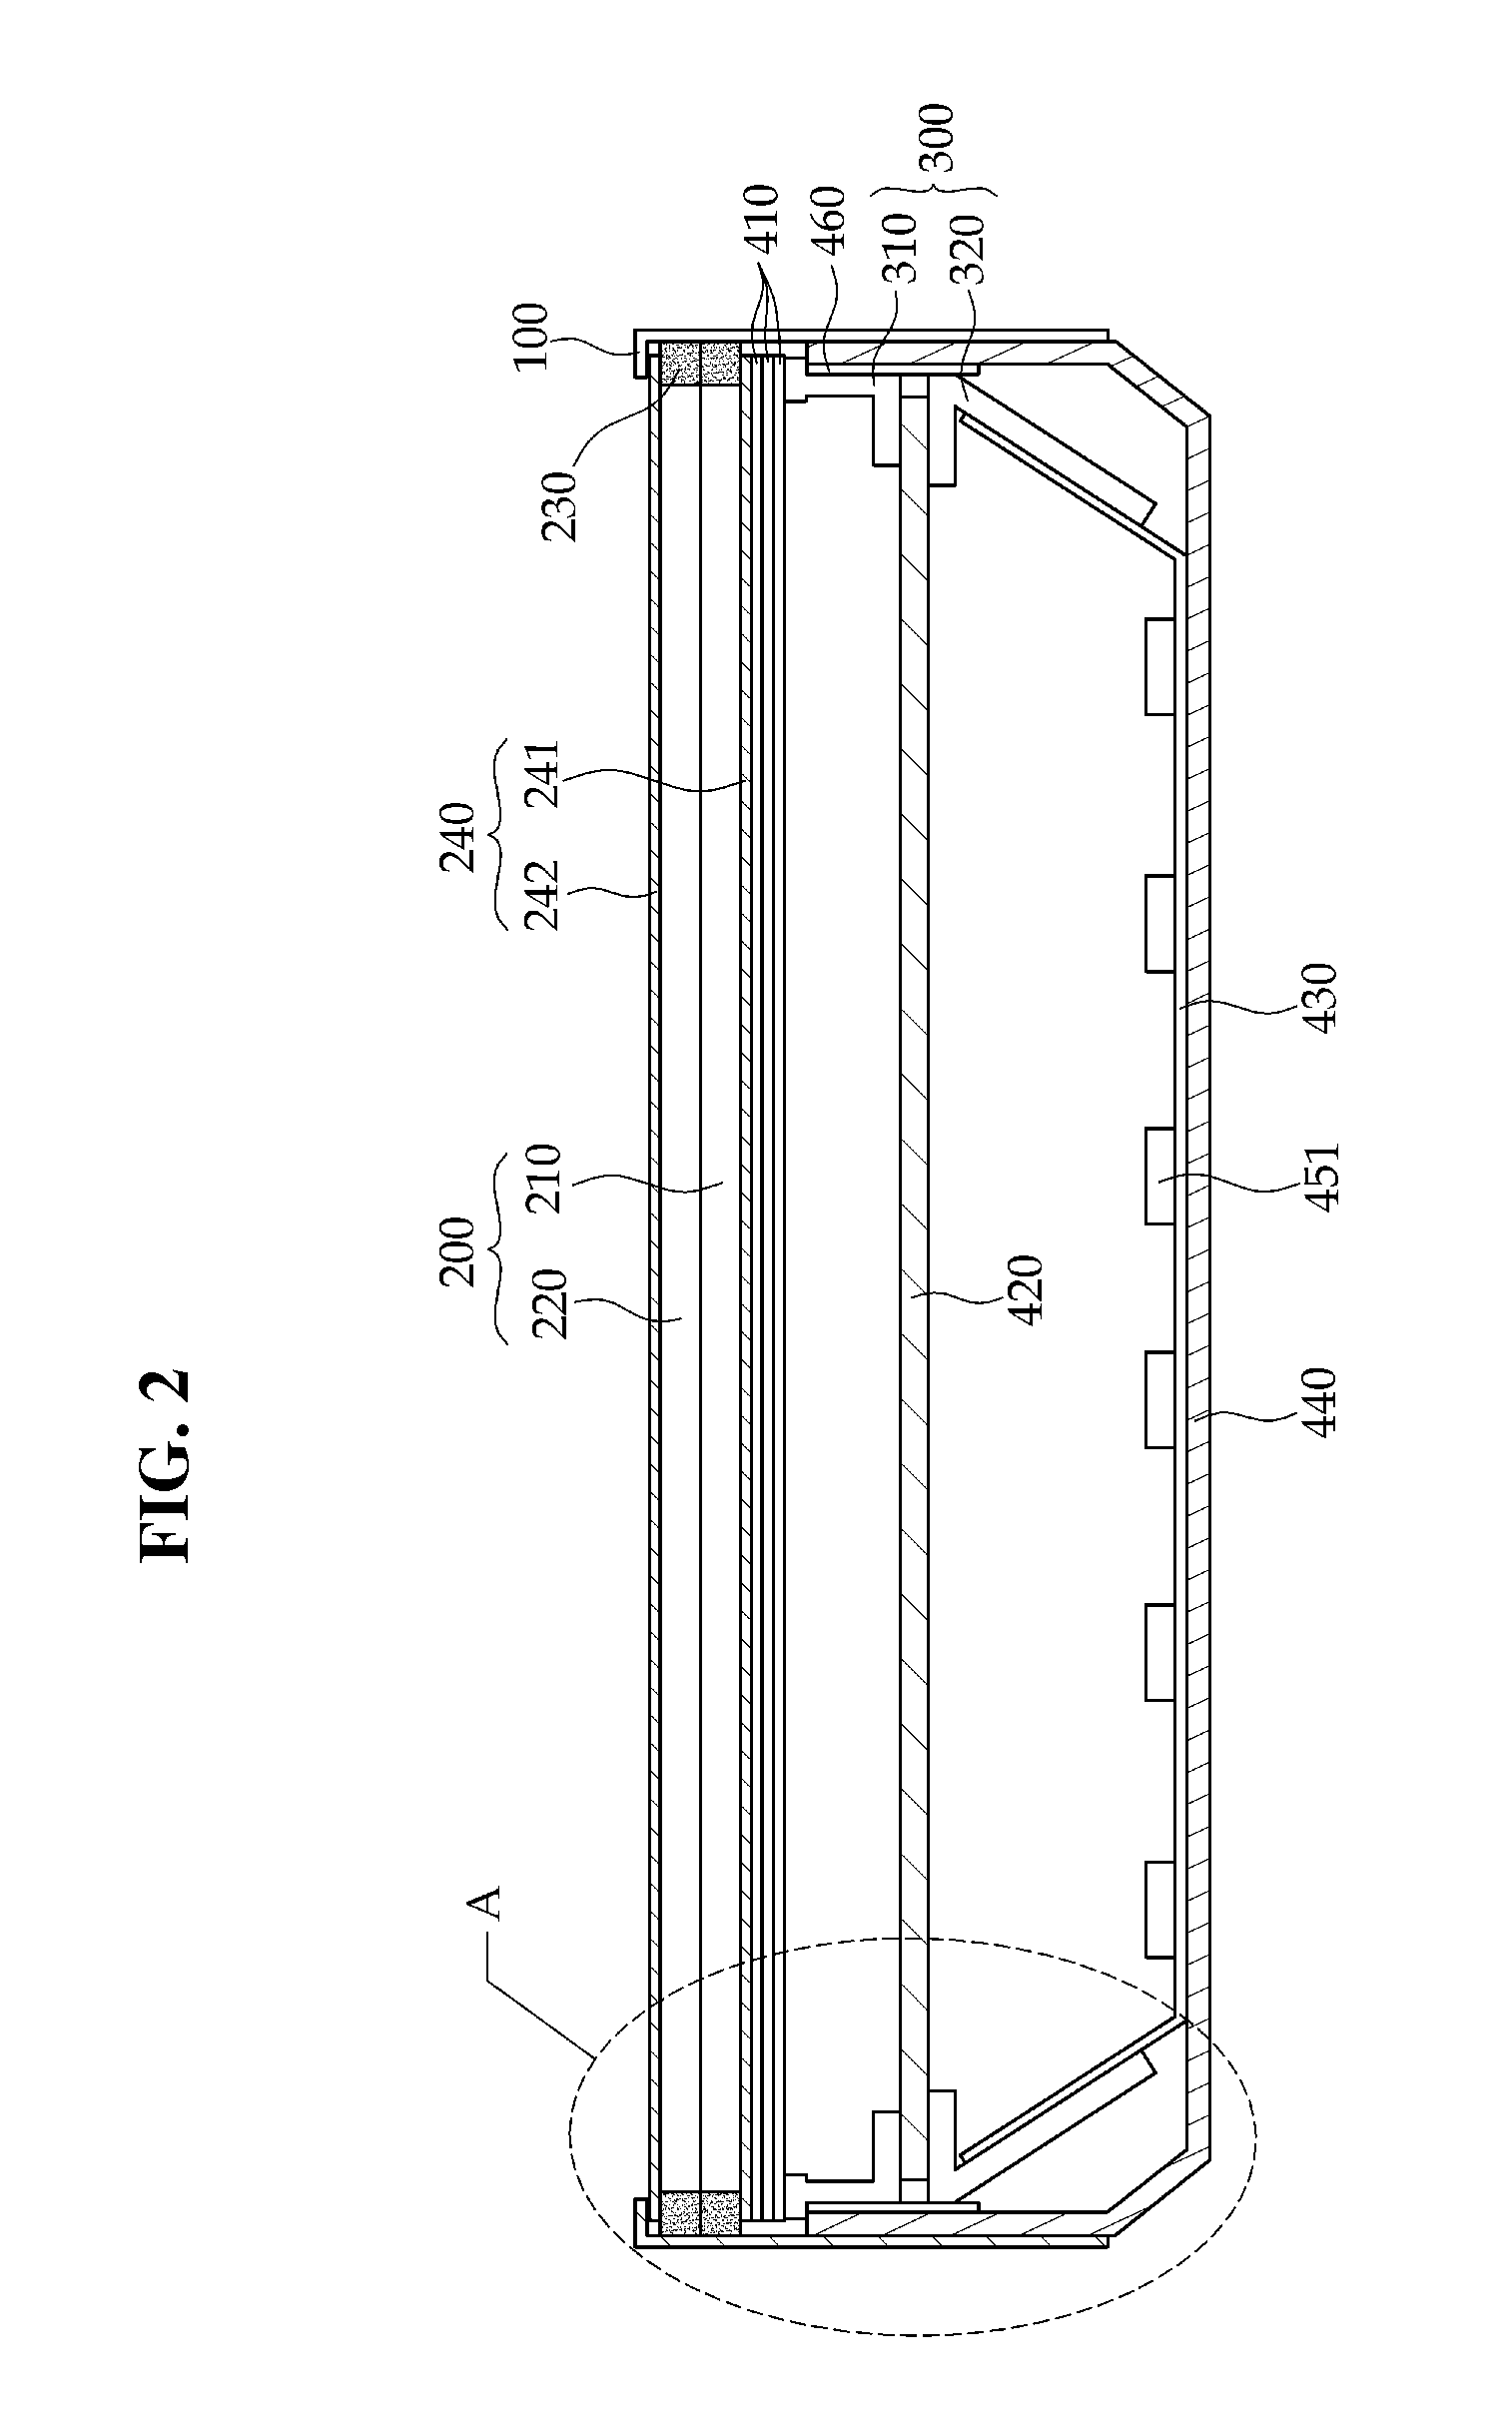 Display device having backlight assembly with transparent mold frame